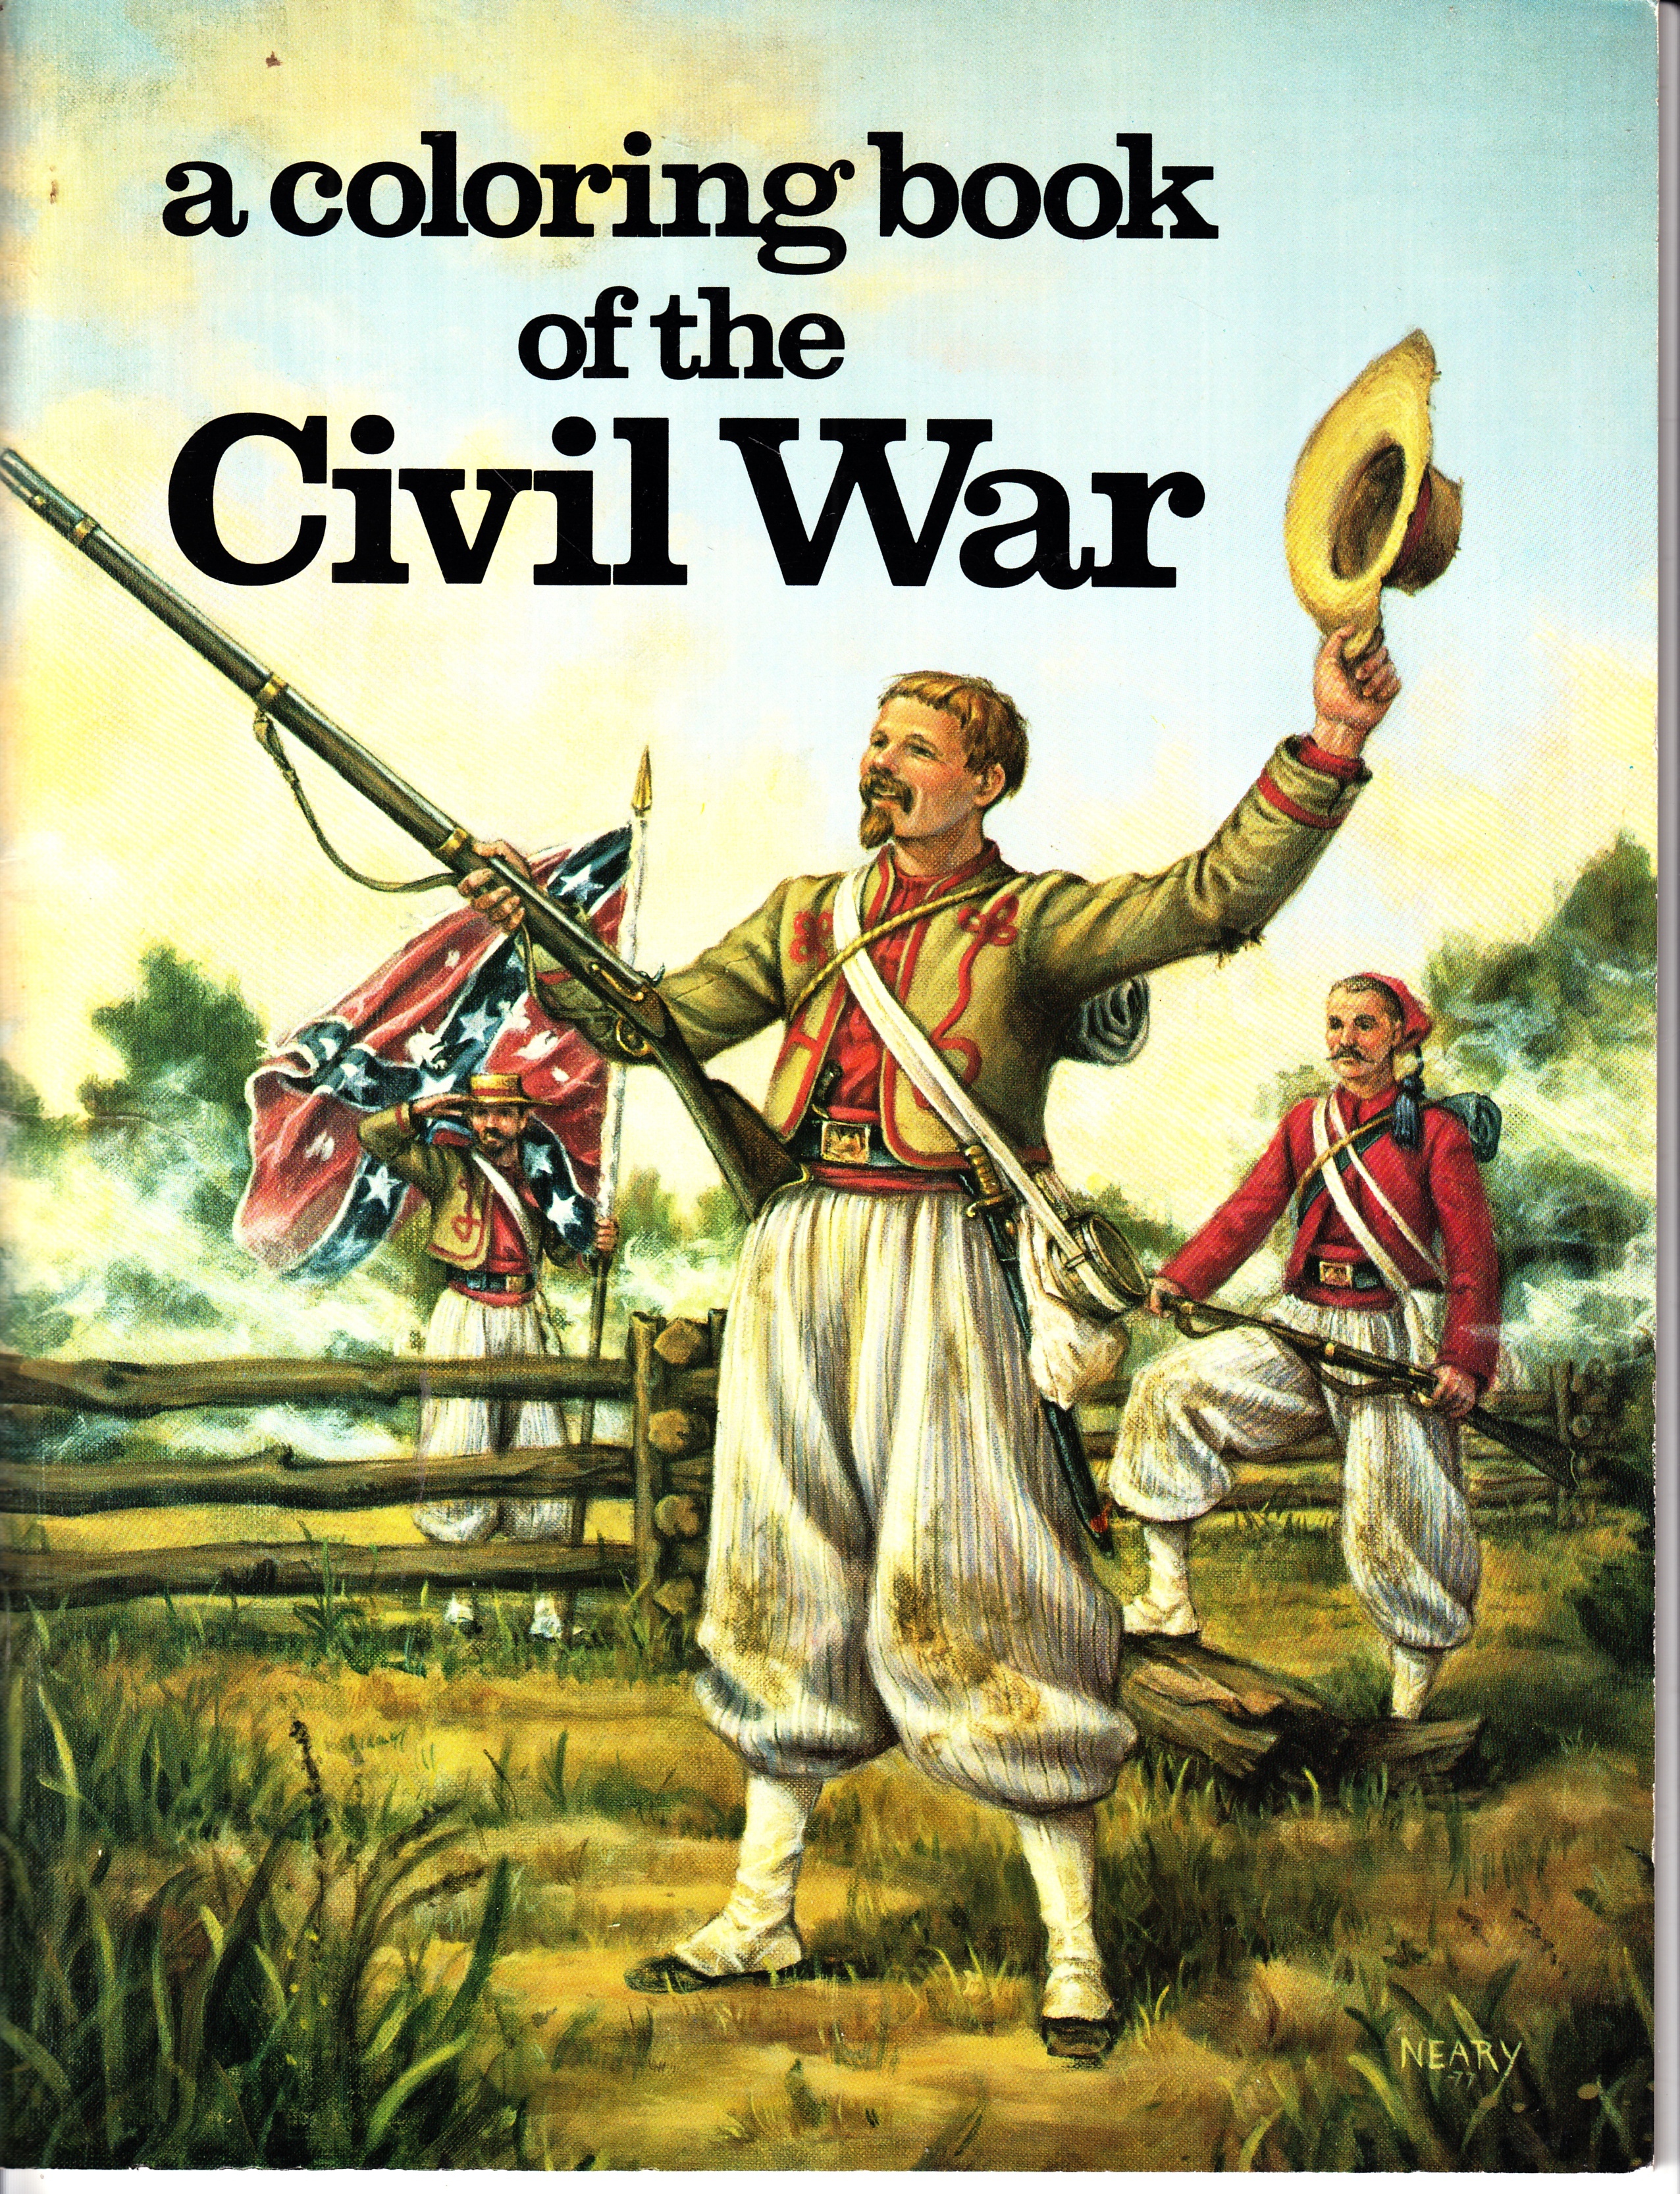 Image for A Coloring Book of the Civil War